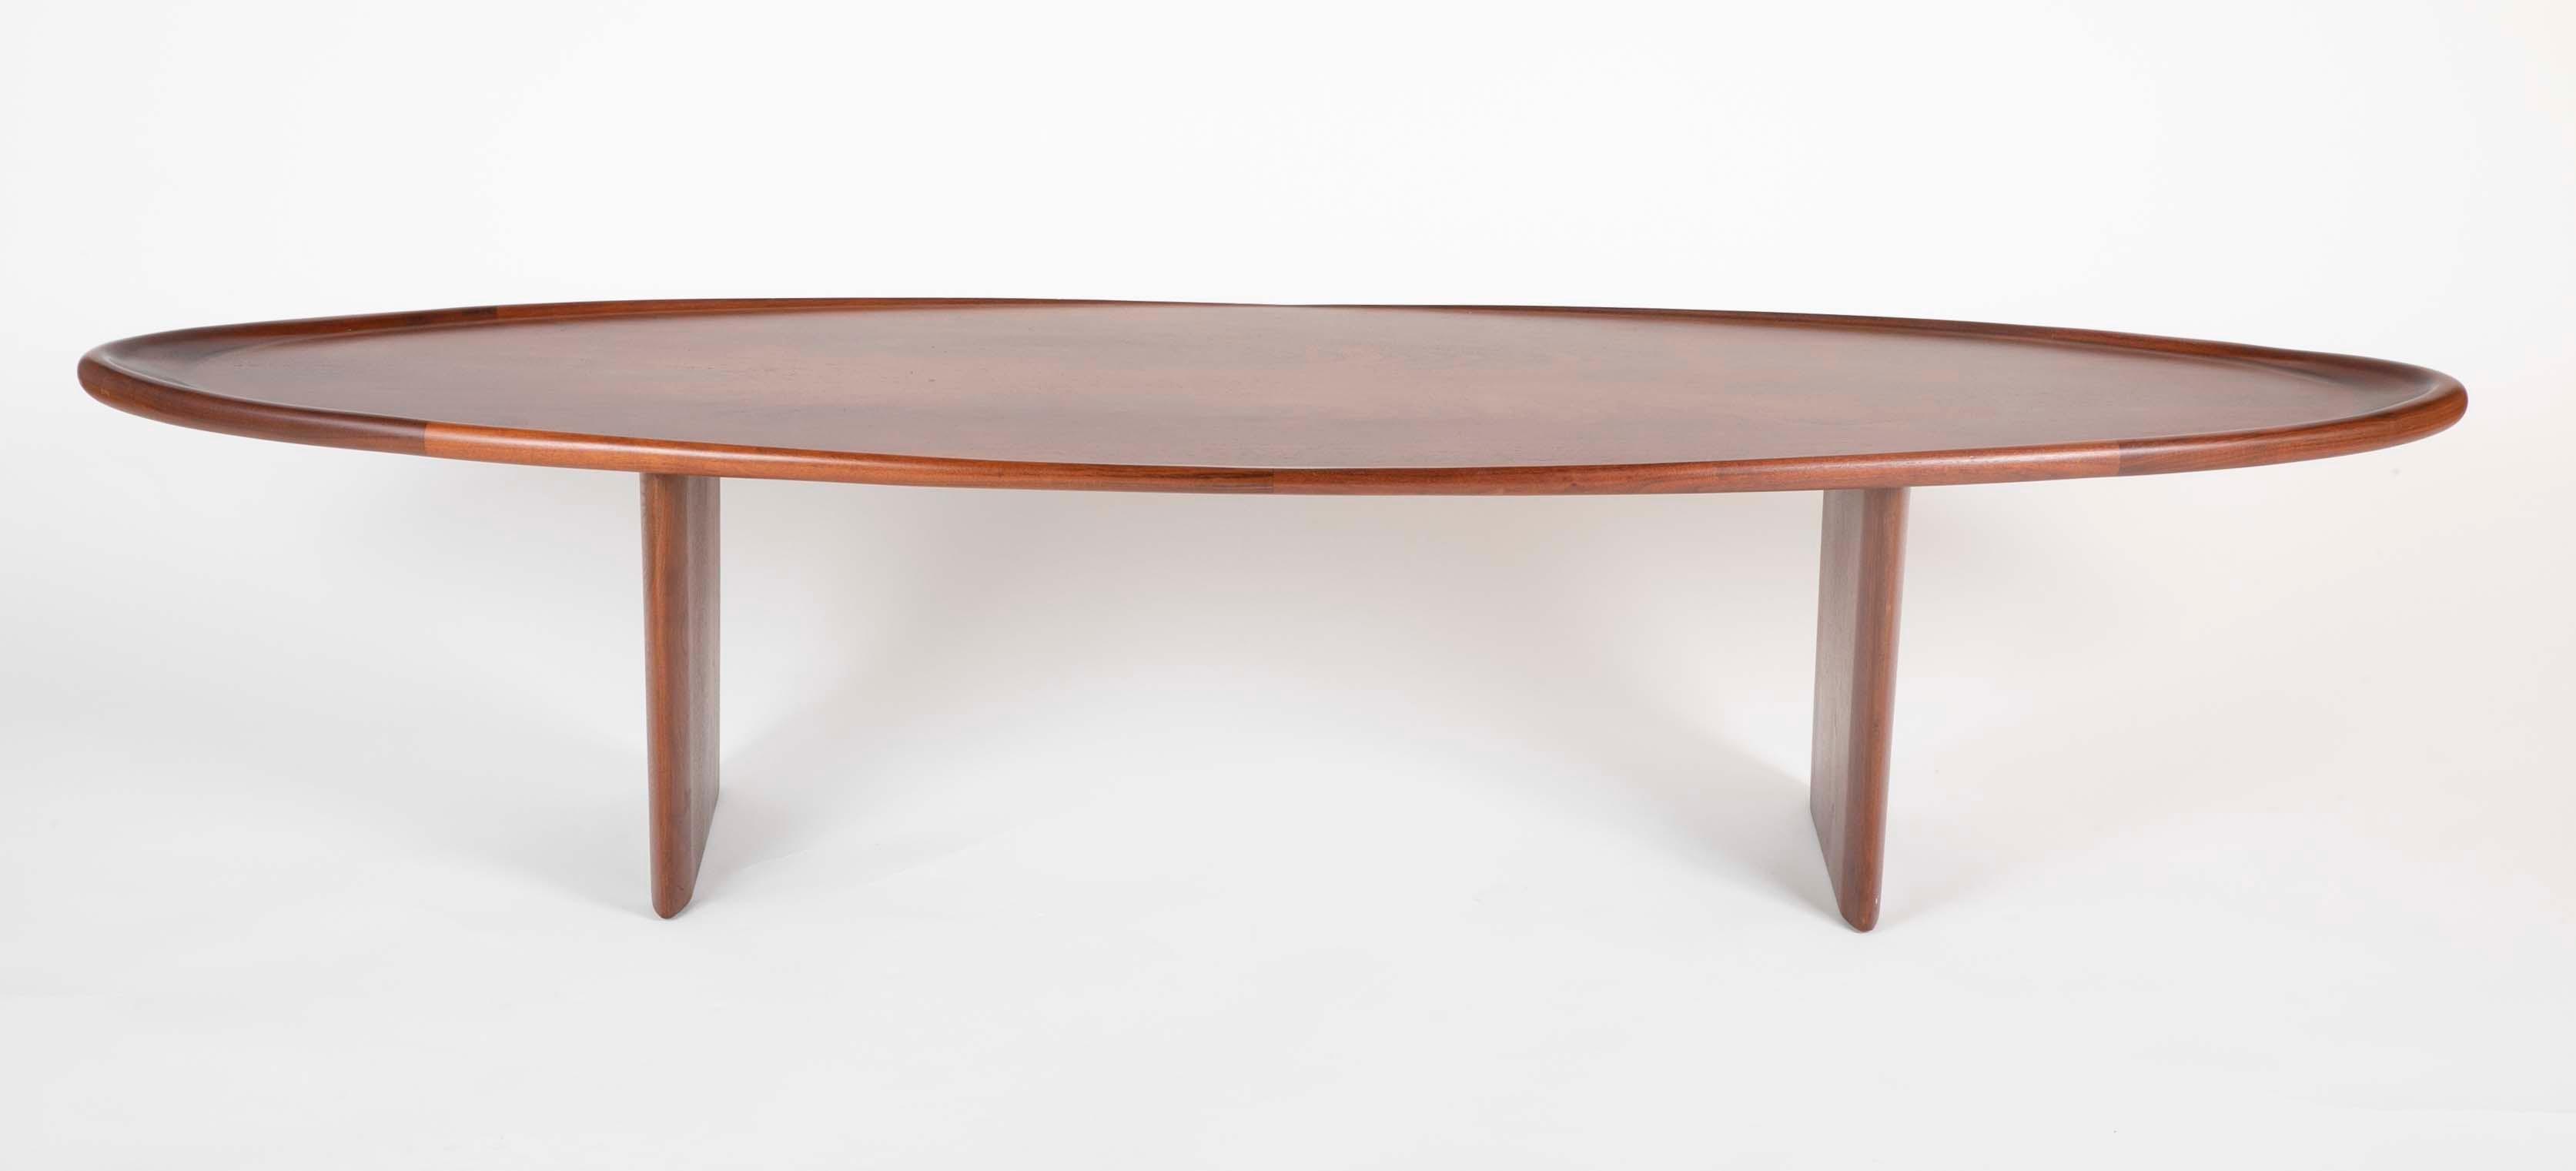 A walnut coffee table, model 3304 designed by T.H. Robsjohn-Gibbings and manufactured by Widdicomb. Label to underside.
 